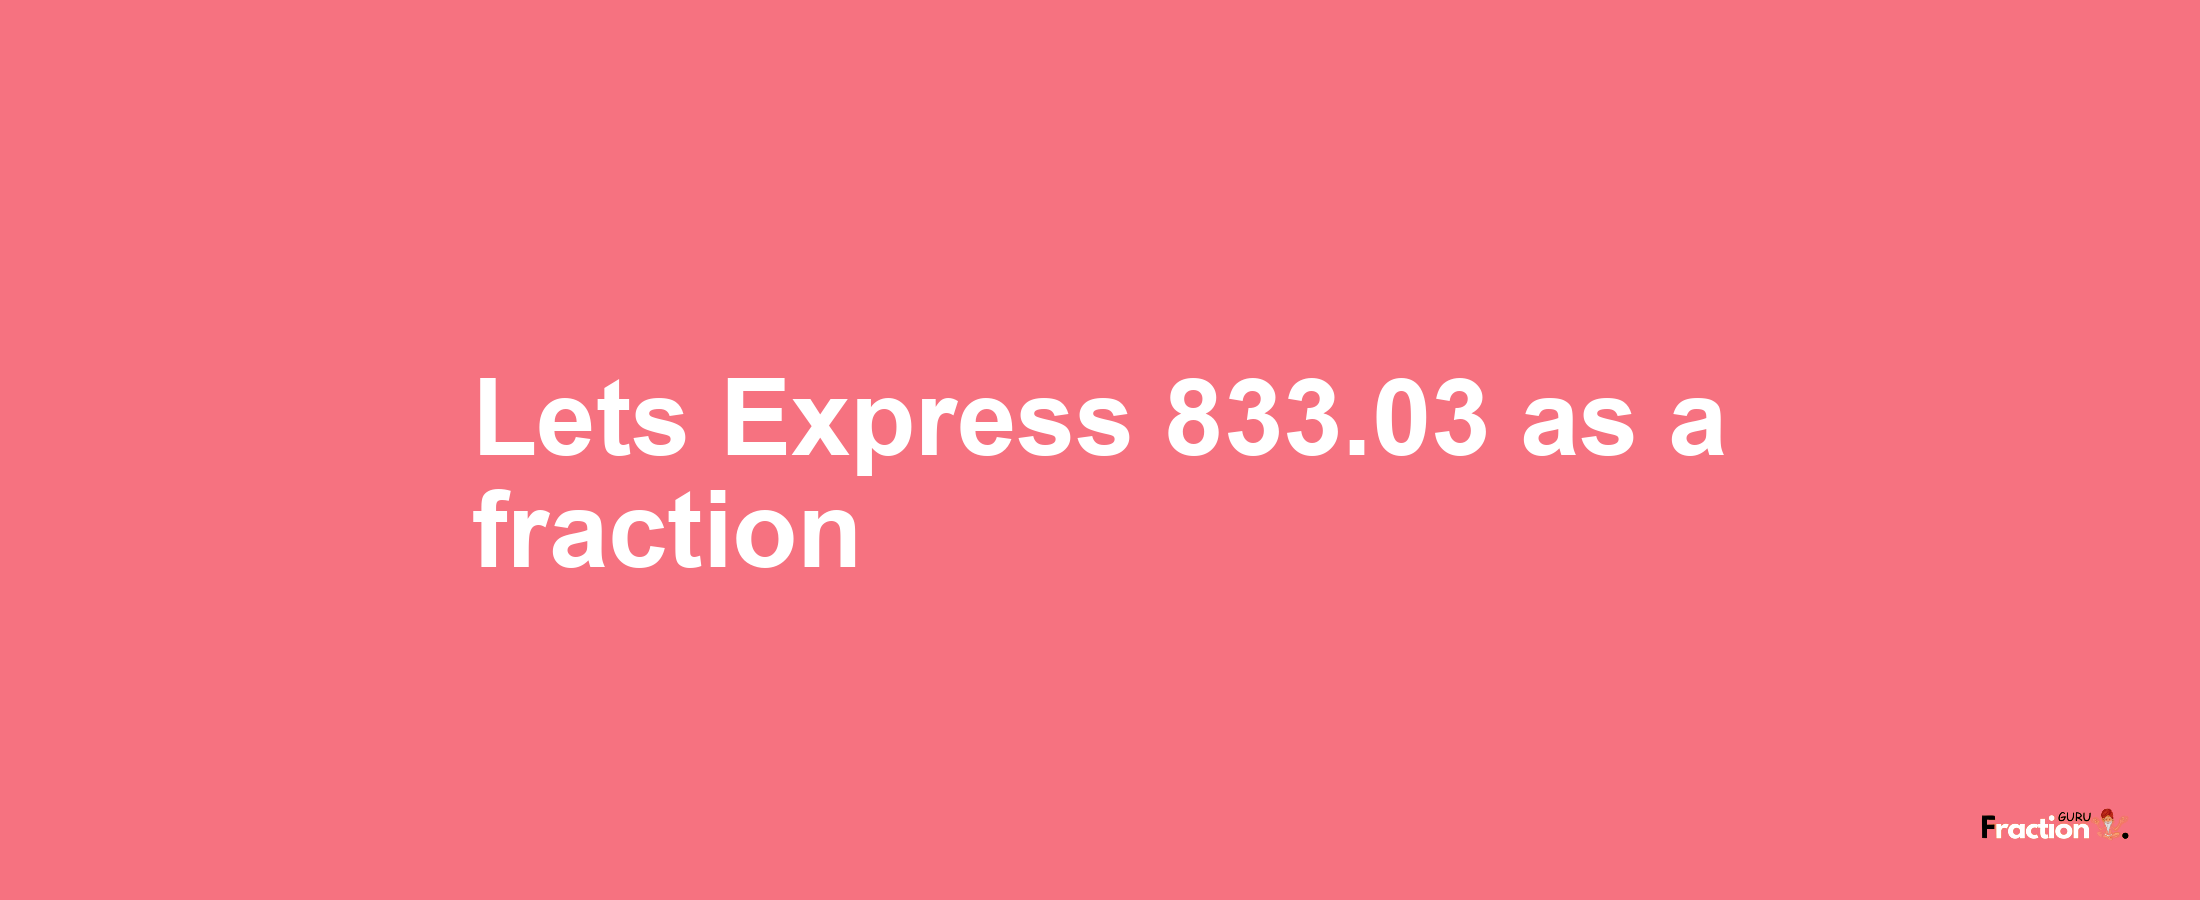 Lets Express 833.03 as afraction